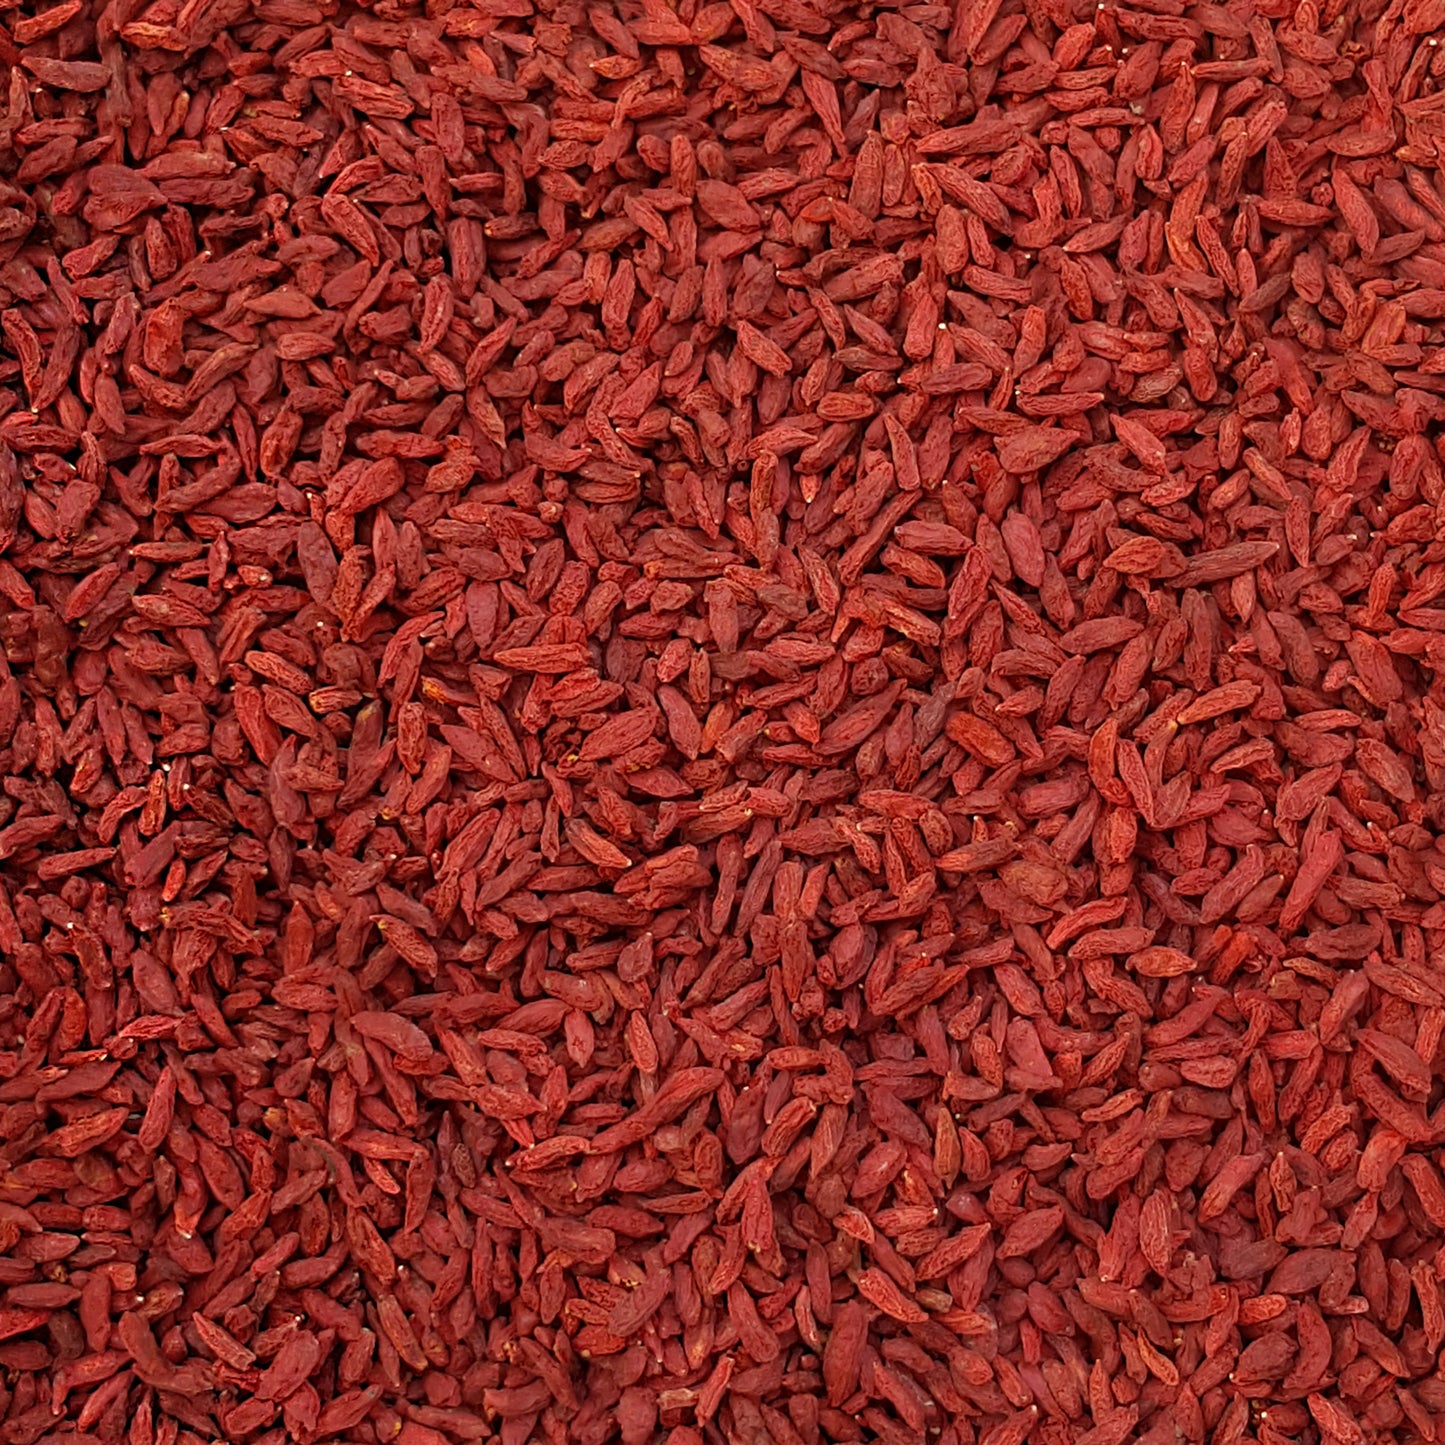 Full frame overhead image of BY NATURE Dried Goji Berries - preservative-free.